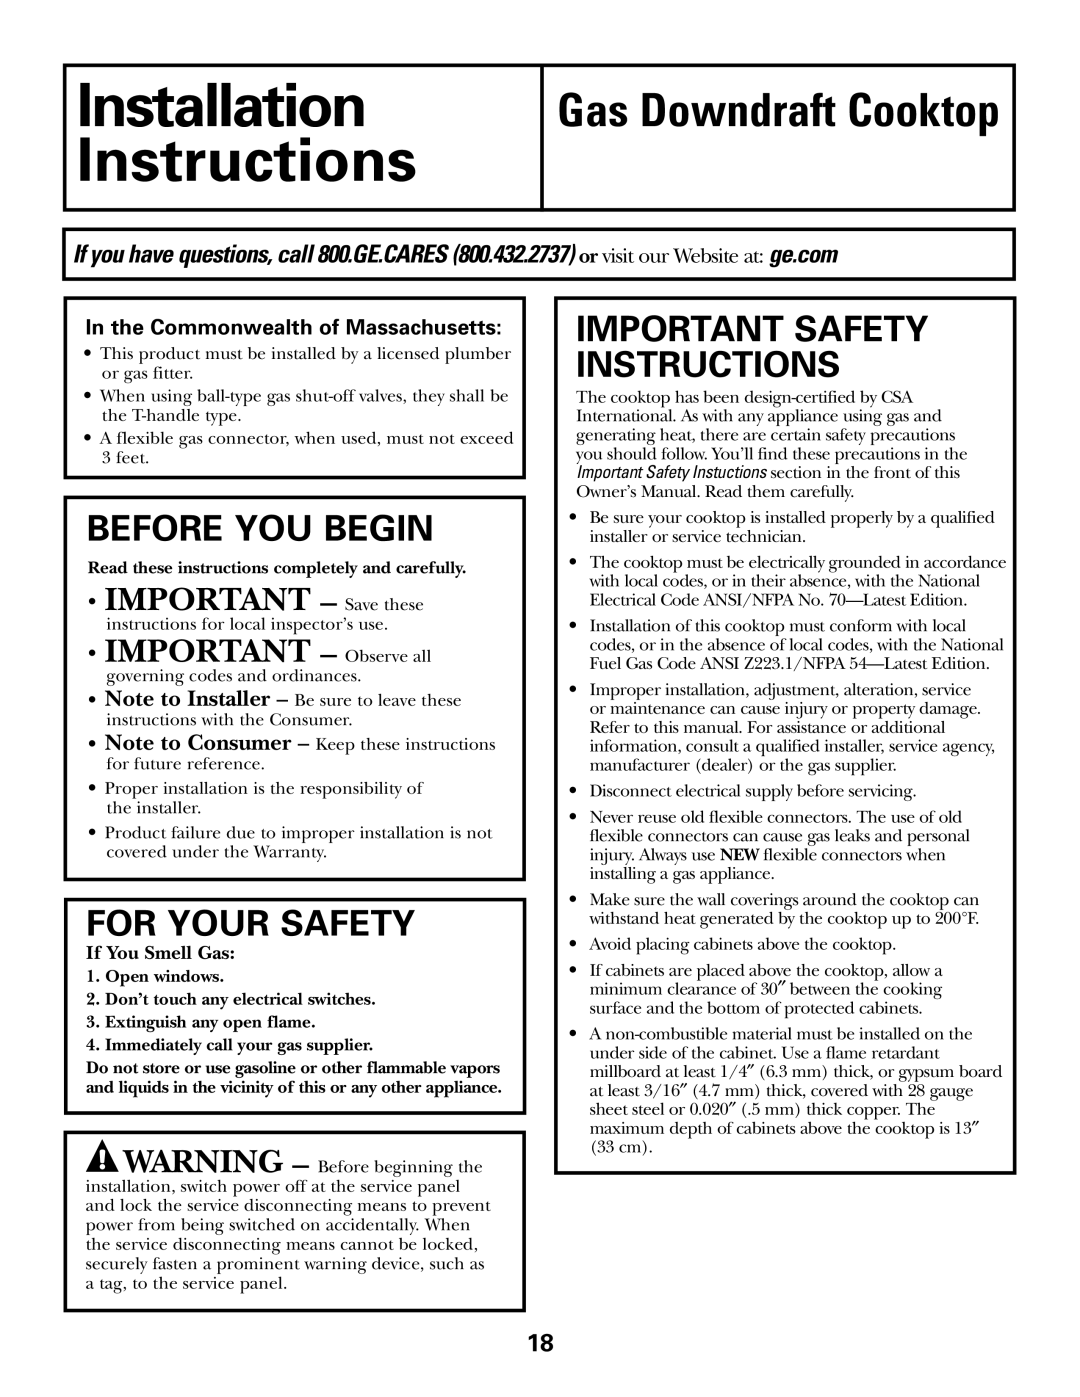 GE JGP990 manual Installation Instructions, Before You Begin, For Your Safety, Important Safety Instructions, Open windows 